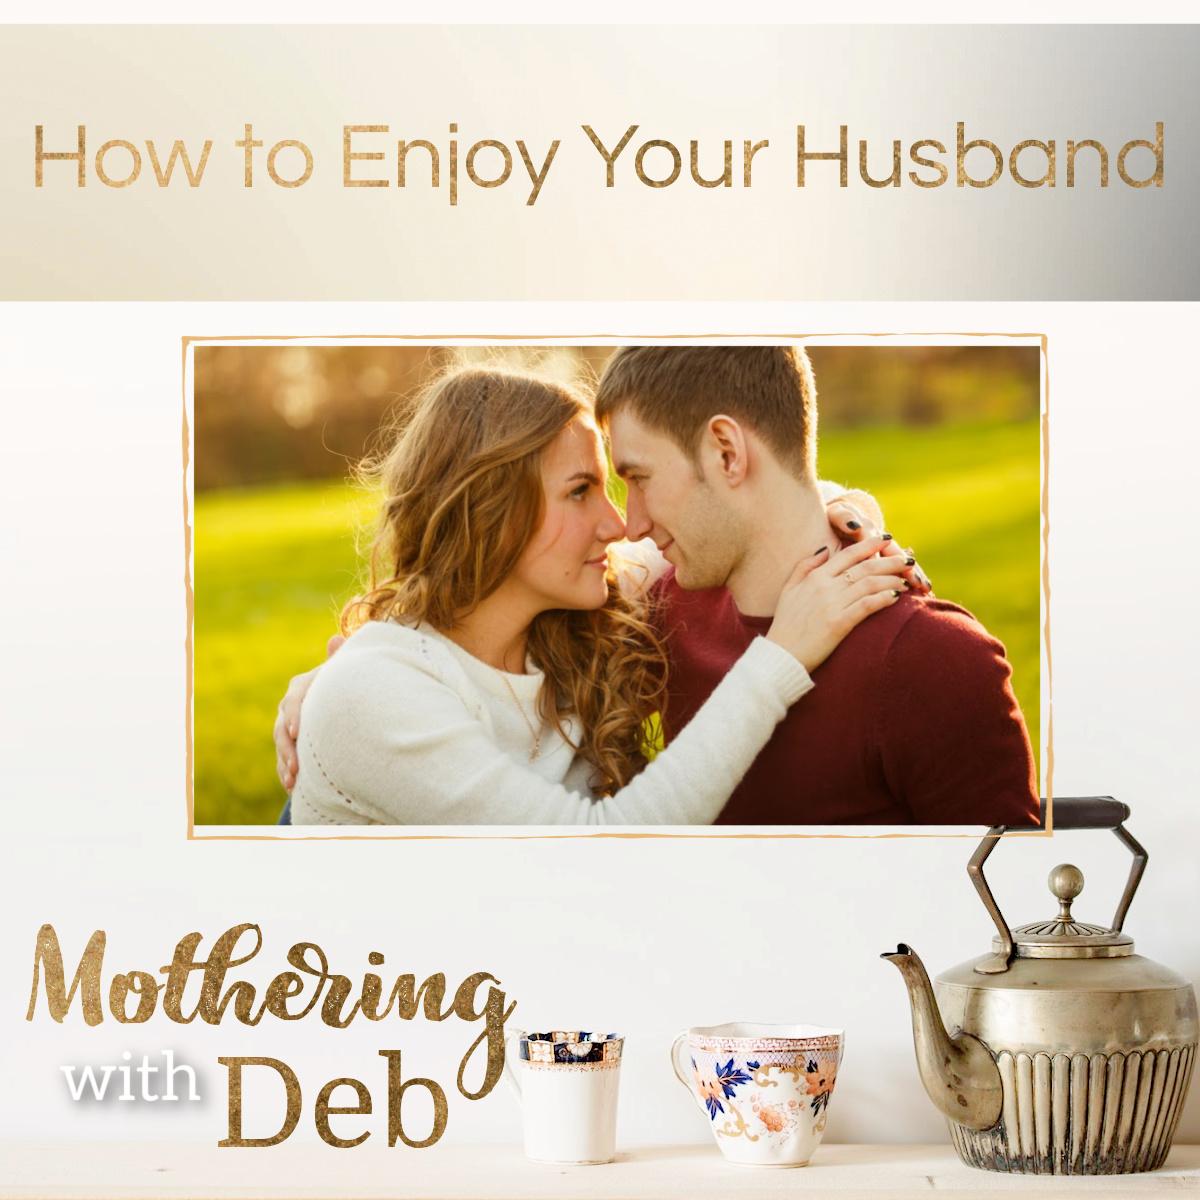 How to Enjoy Your Husband (1)